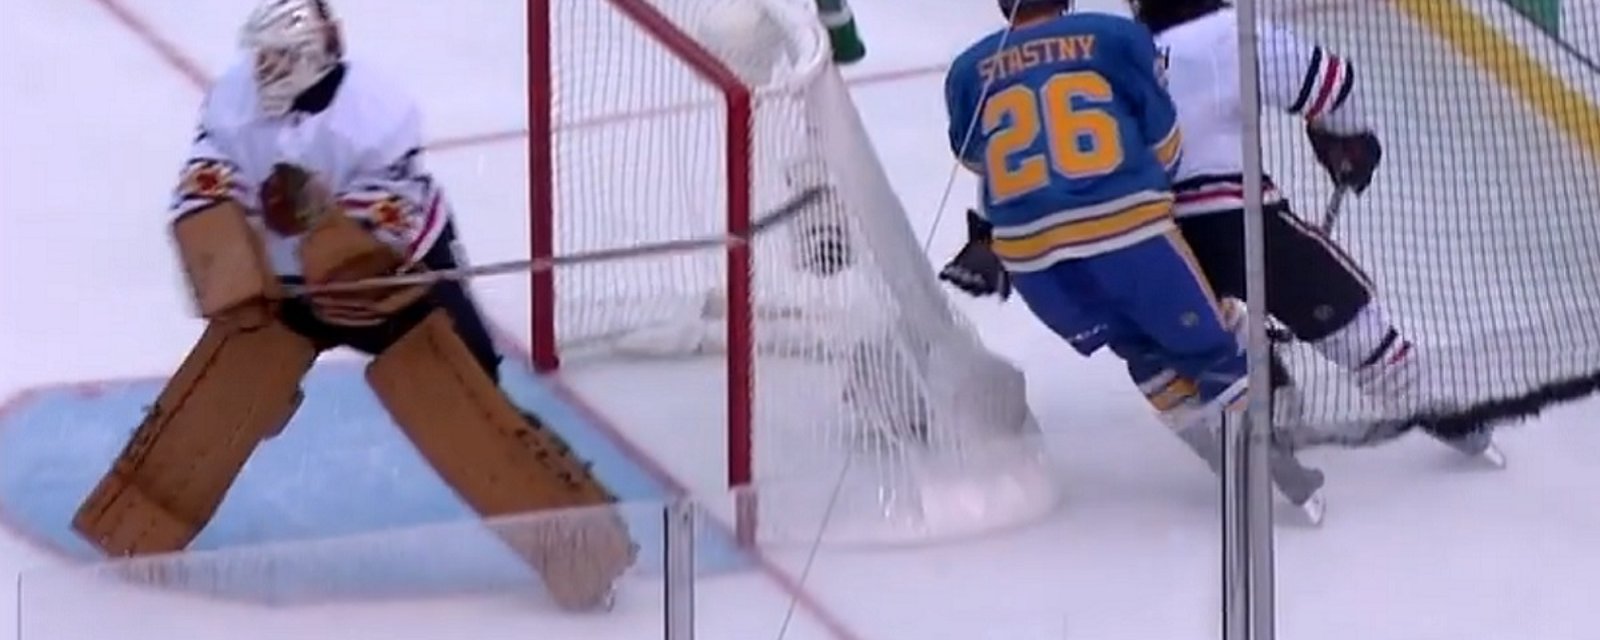 Crawford takes matters into his own hands after no call on trip. 